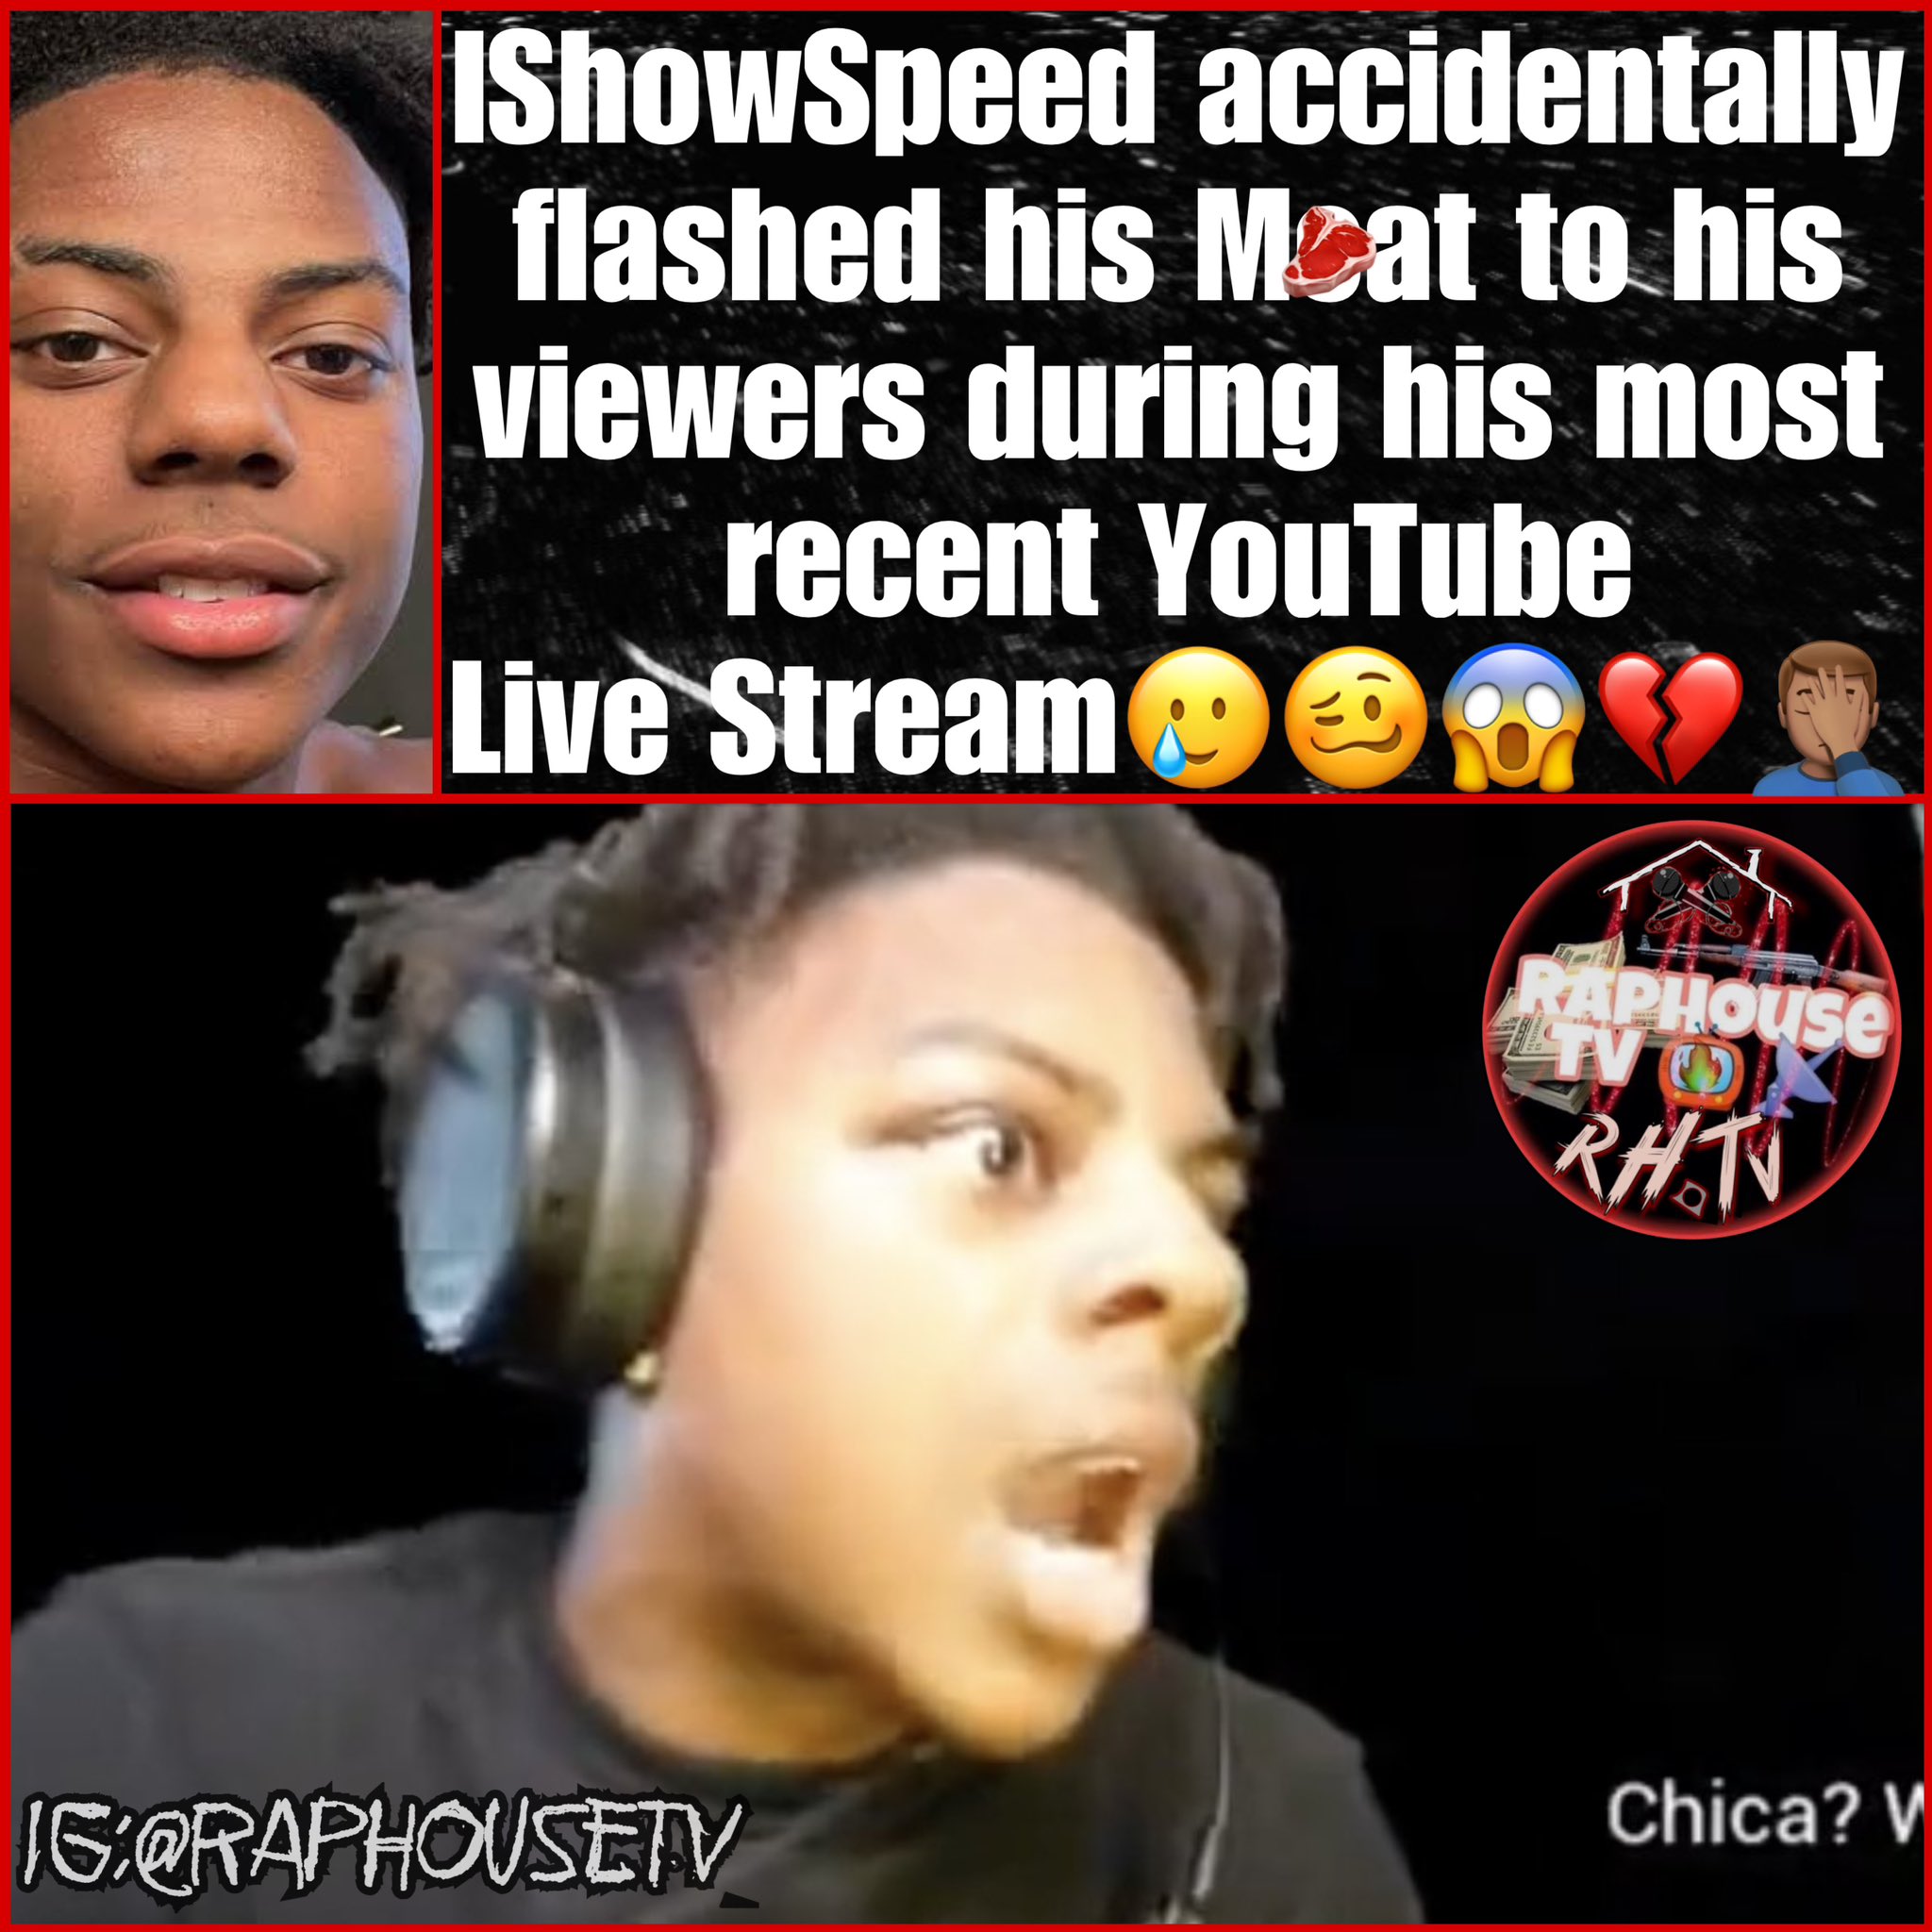 ISHOWSPEED flashed his meat live??????